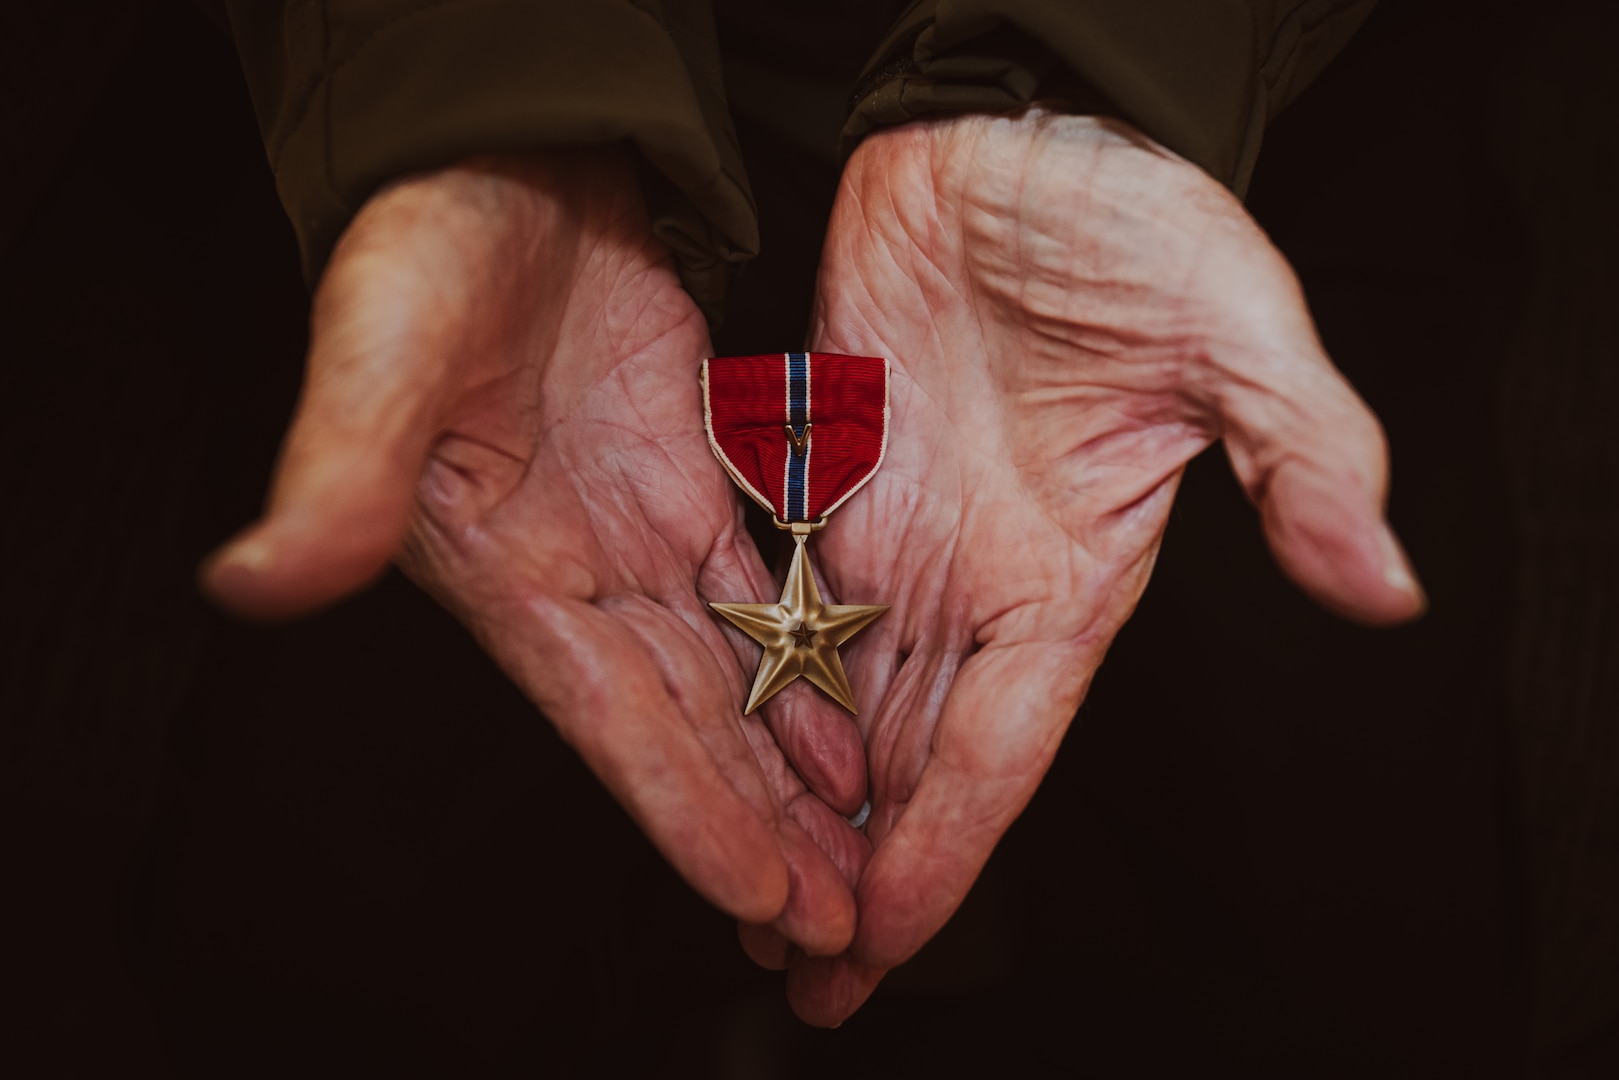 Retired U.S. Marine Corps Staff Sgt. Ismael Gonzalez-Ramos, a former infantry unit leader and decorated combat veteran, holds his Bronze Star medal with a combat action “V” device, an award for valor and heroism in combat, at his home in Jacksonville, North Carolina, Nov. 20, 2023. 92-year-old Gonzales-Ramos was drafted from Cidra, Puerto Rico in 1951 and served in the Korean War and Vietnam War during his 20 years of honorable service in the Marine Corps. (U.S. Marine Corps photo by Lance Cpl. Loriann Dauscher)